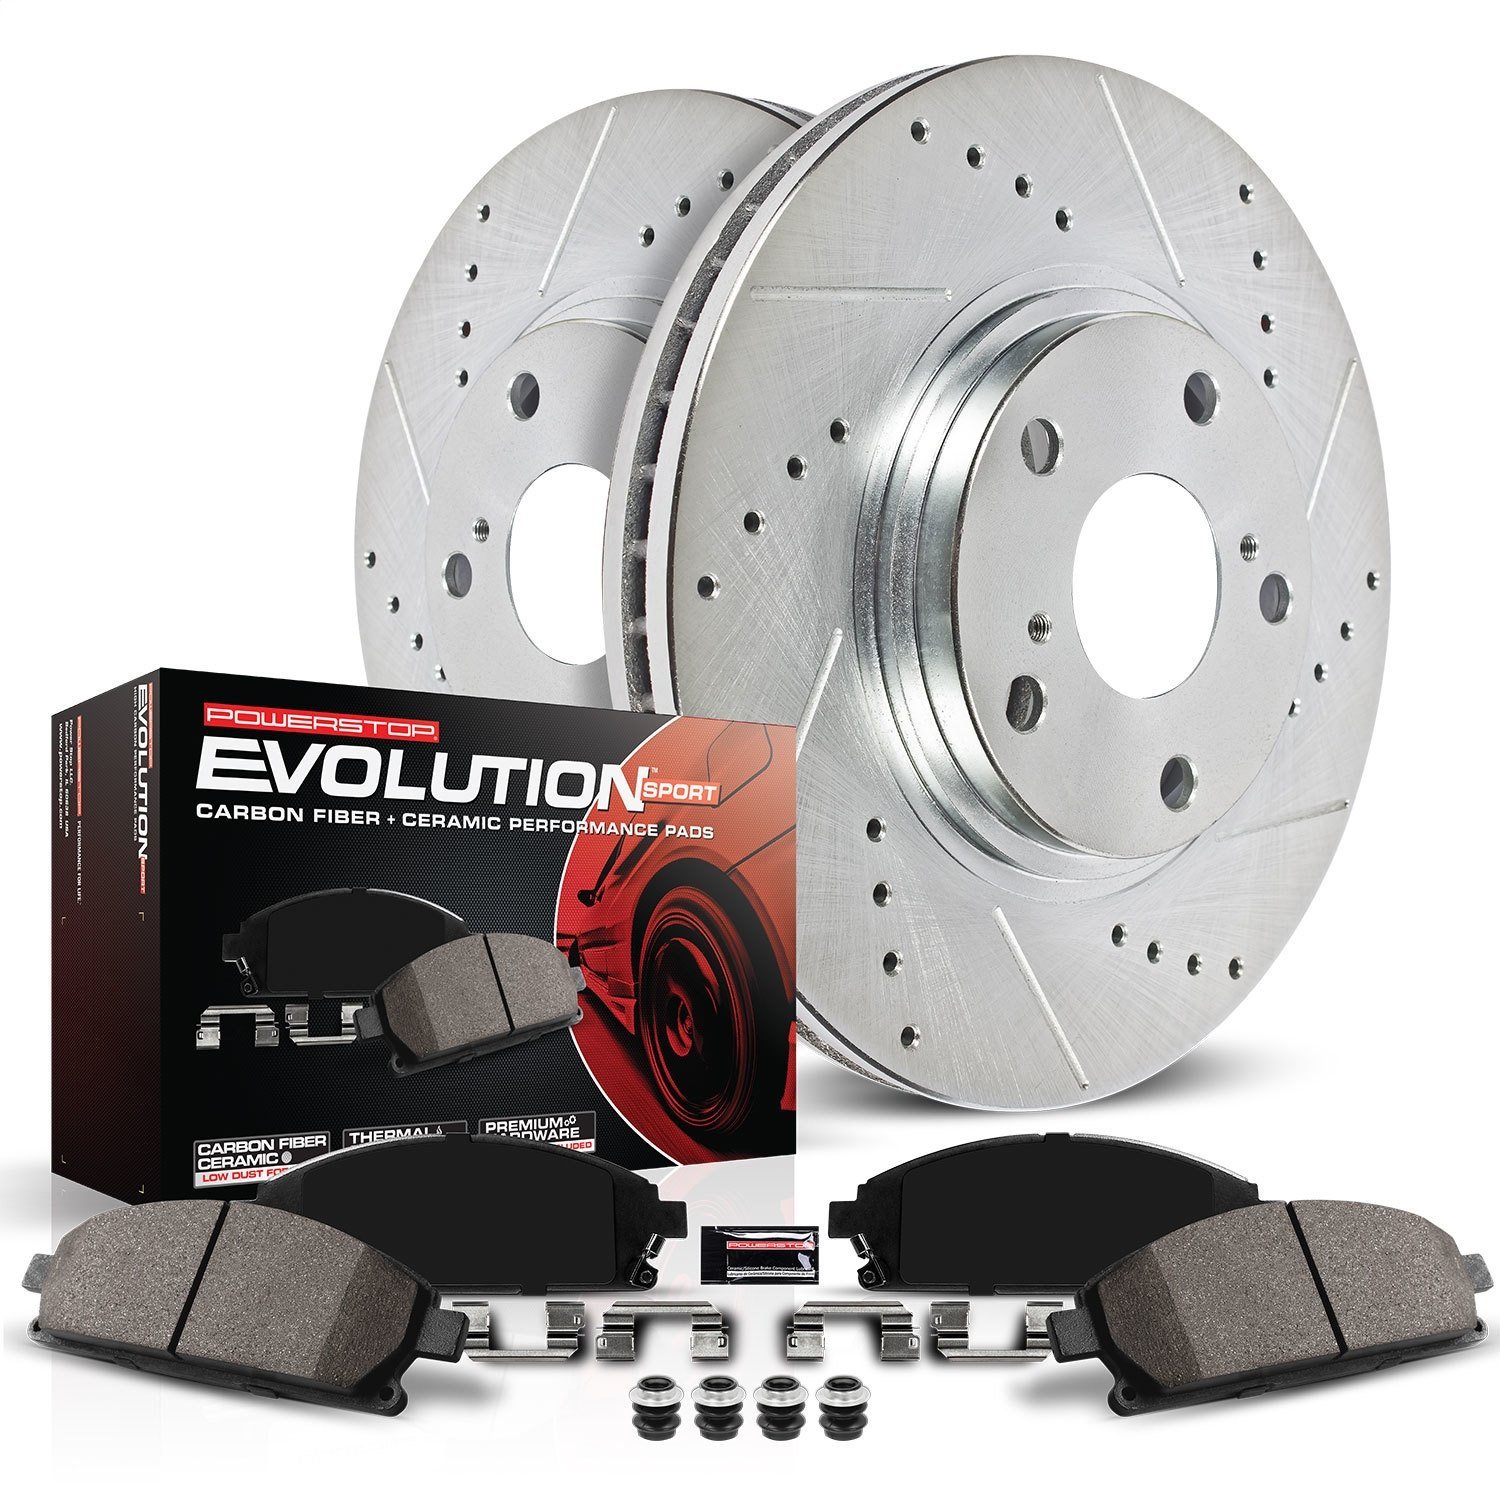 Performance Brake Upgrade Kit Front Incl. Silver Zinc Plated Cross-Drilled And Slotted Rotors w/Z16 Ceramic Scorched Brake Pads